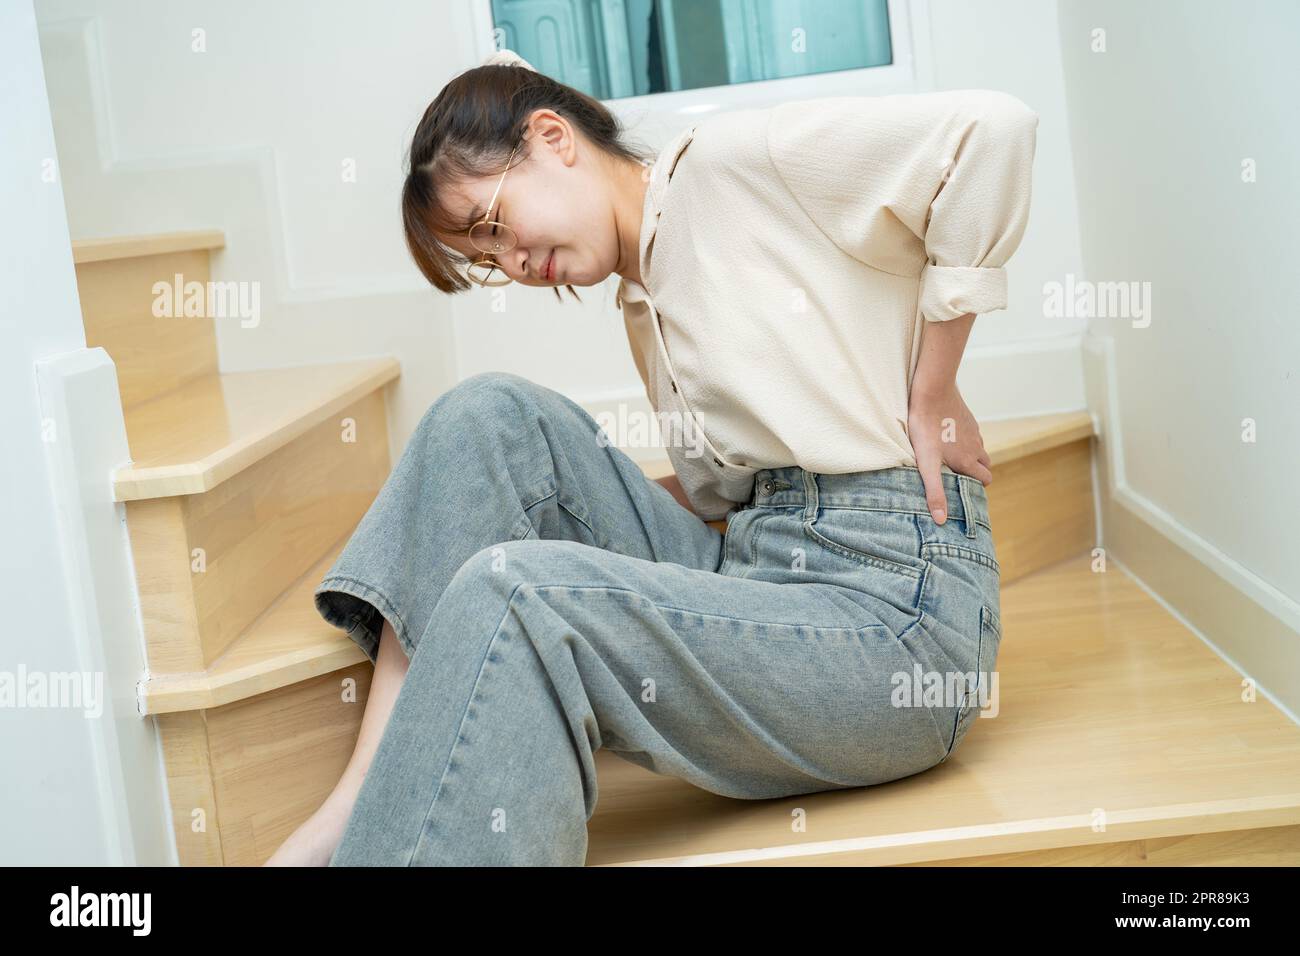 Asian lady woman patient fall down the stairs because slippery surfaces Stock Photo